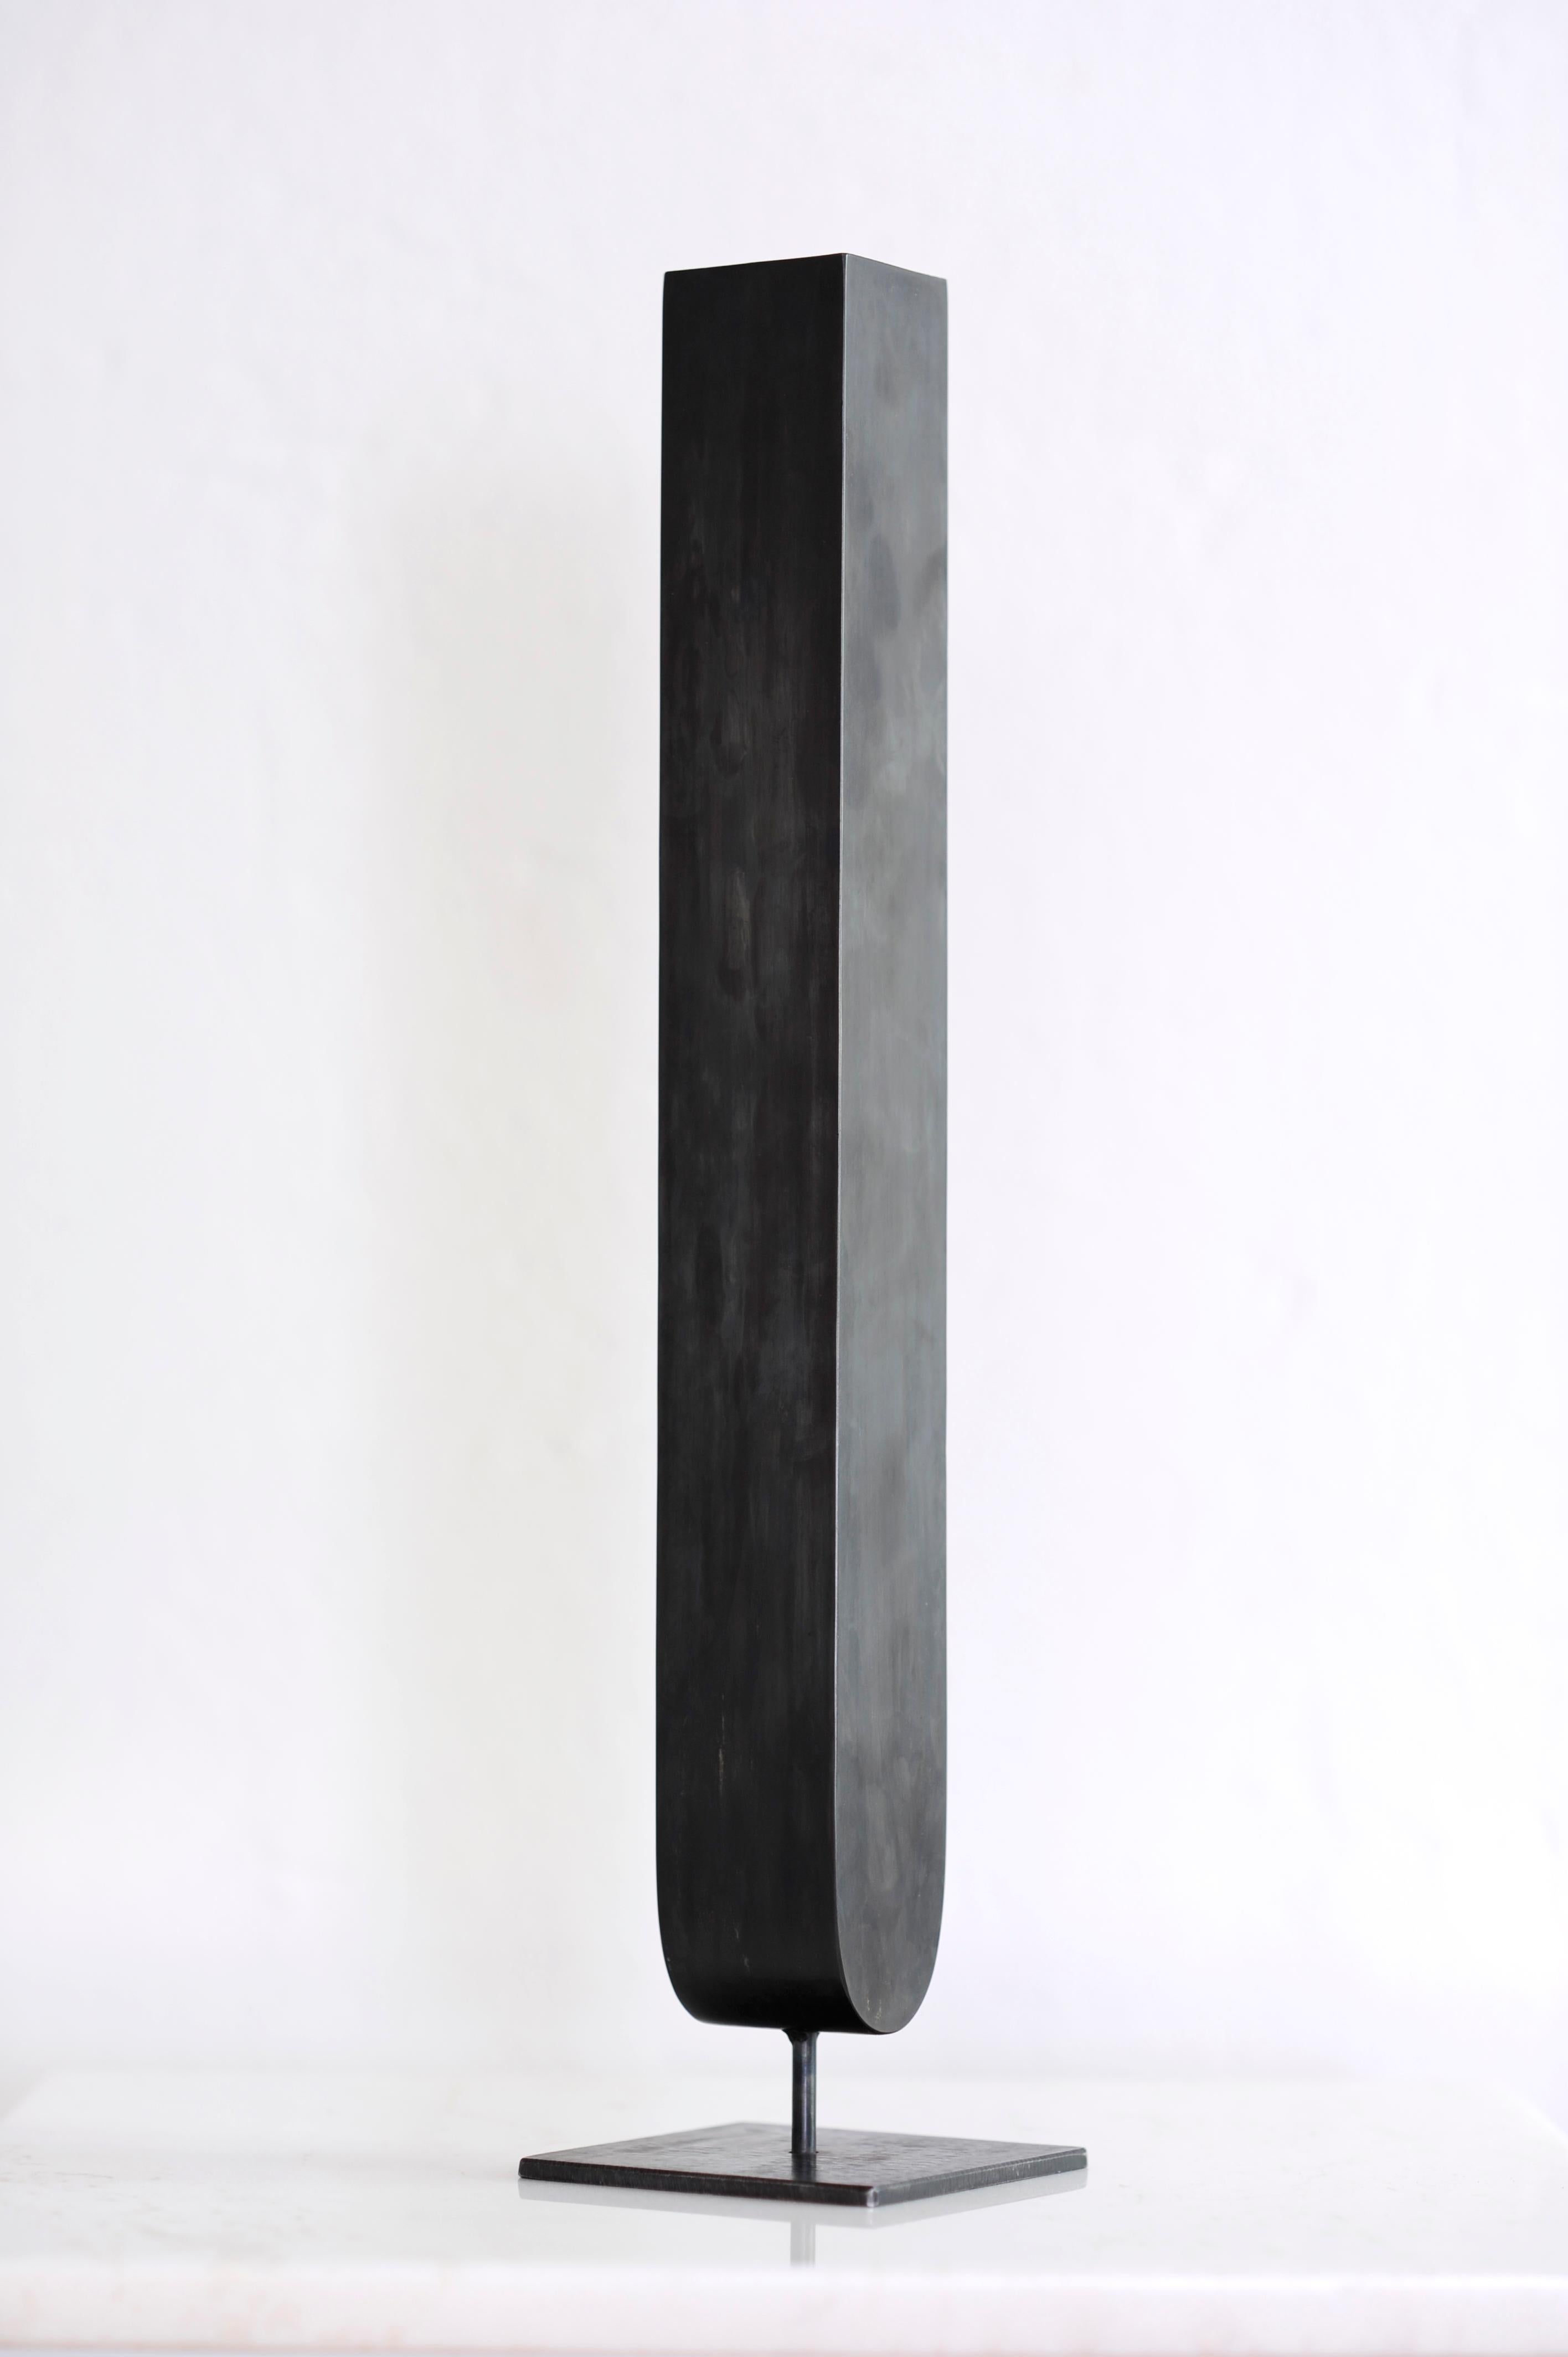 Steel sculpted vase, signed by Lukasz Friedrich
Steel vase “I”
Measures: 5 x 5 H 44 cm
Finish: Black patina on steel, wax
Limited Edition of 50
Signed